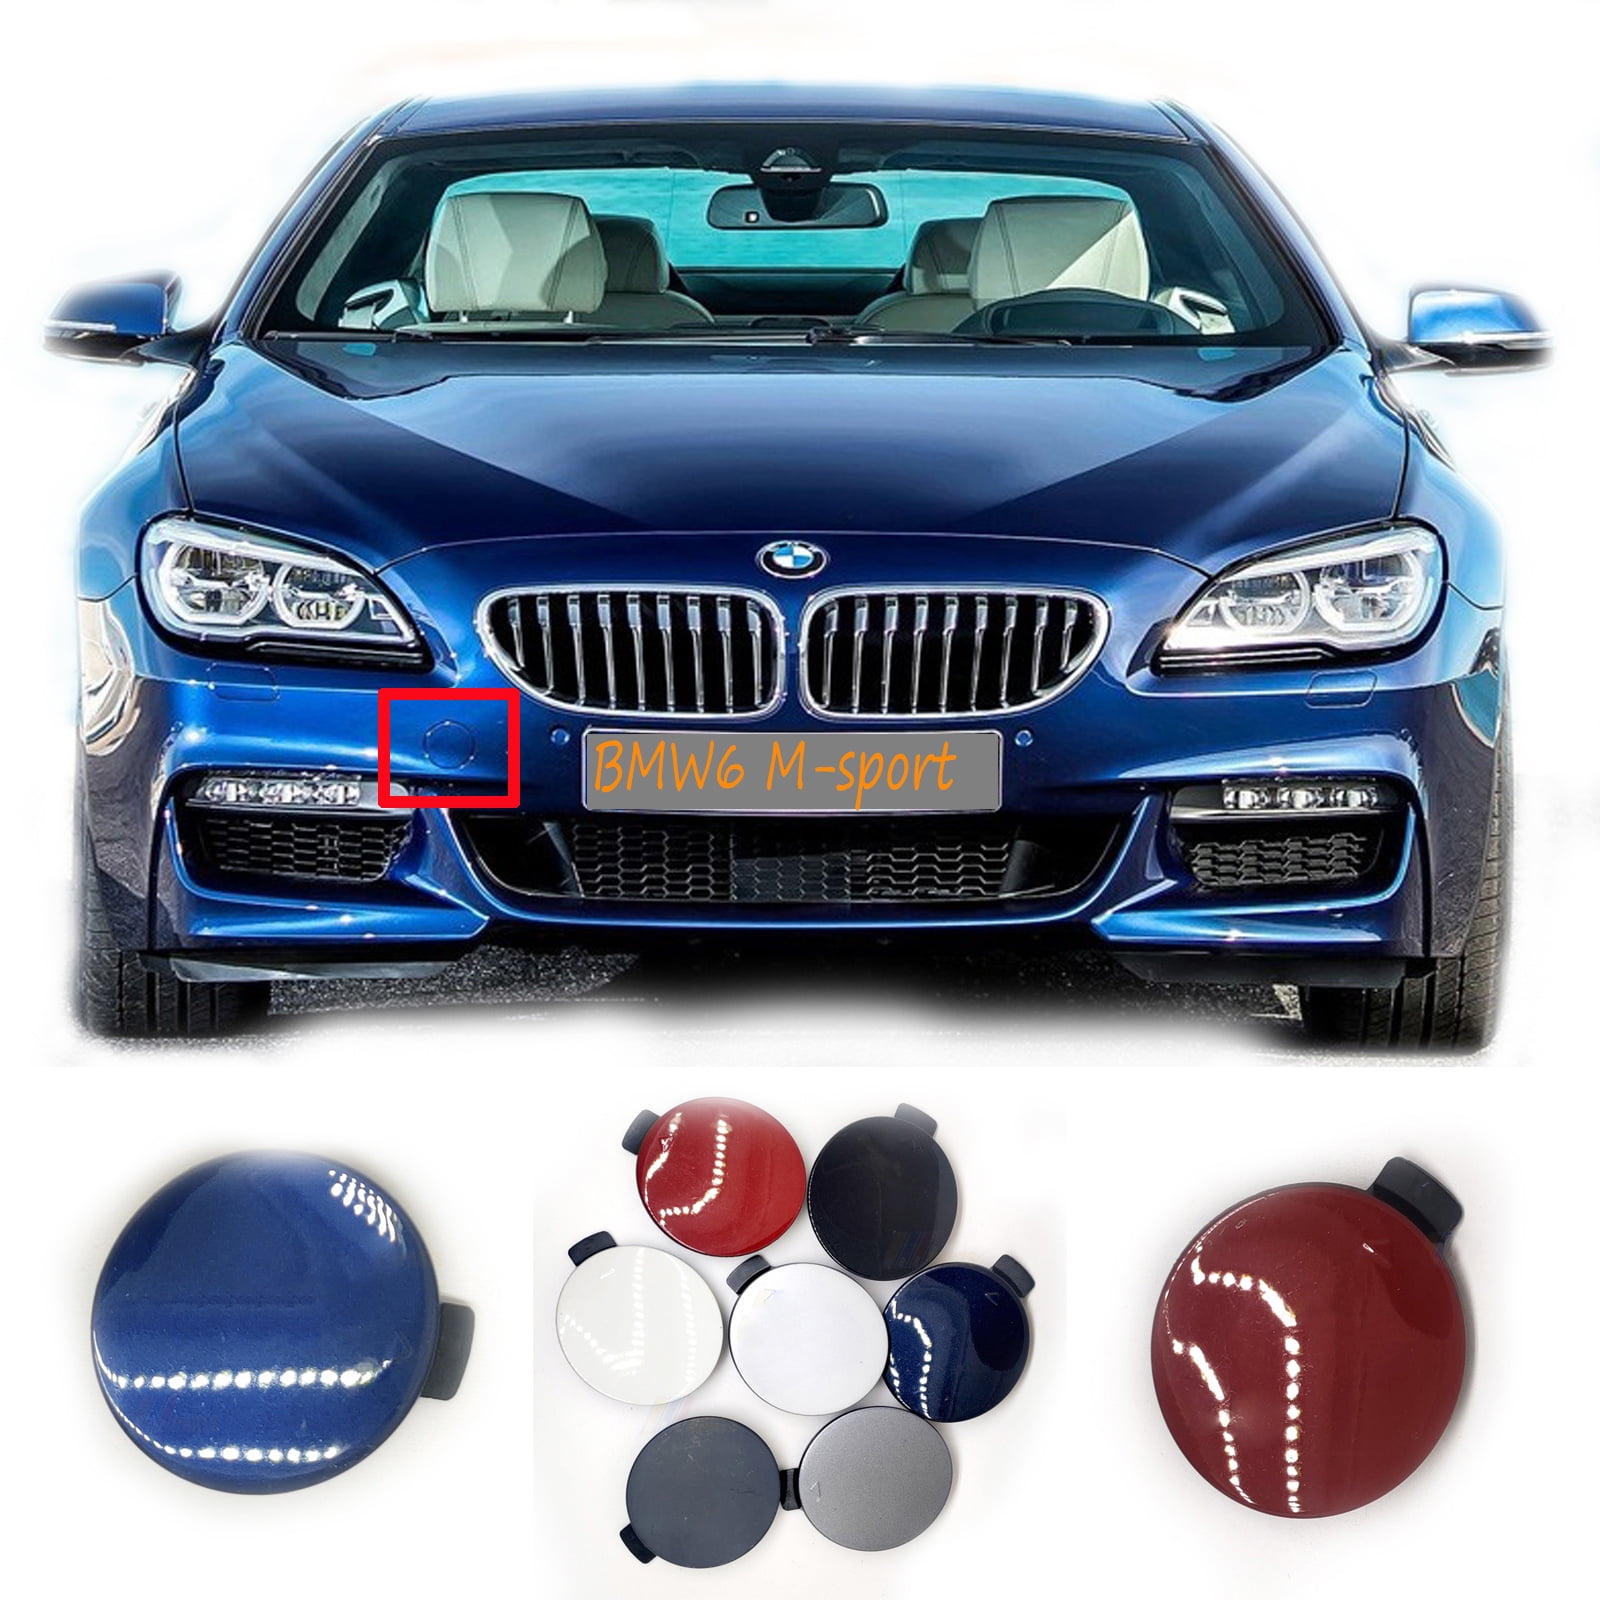 Trimla Front Tow Cover for BMW 6 series F06 F012 F13 Fit 640dX